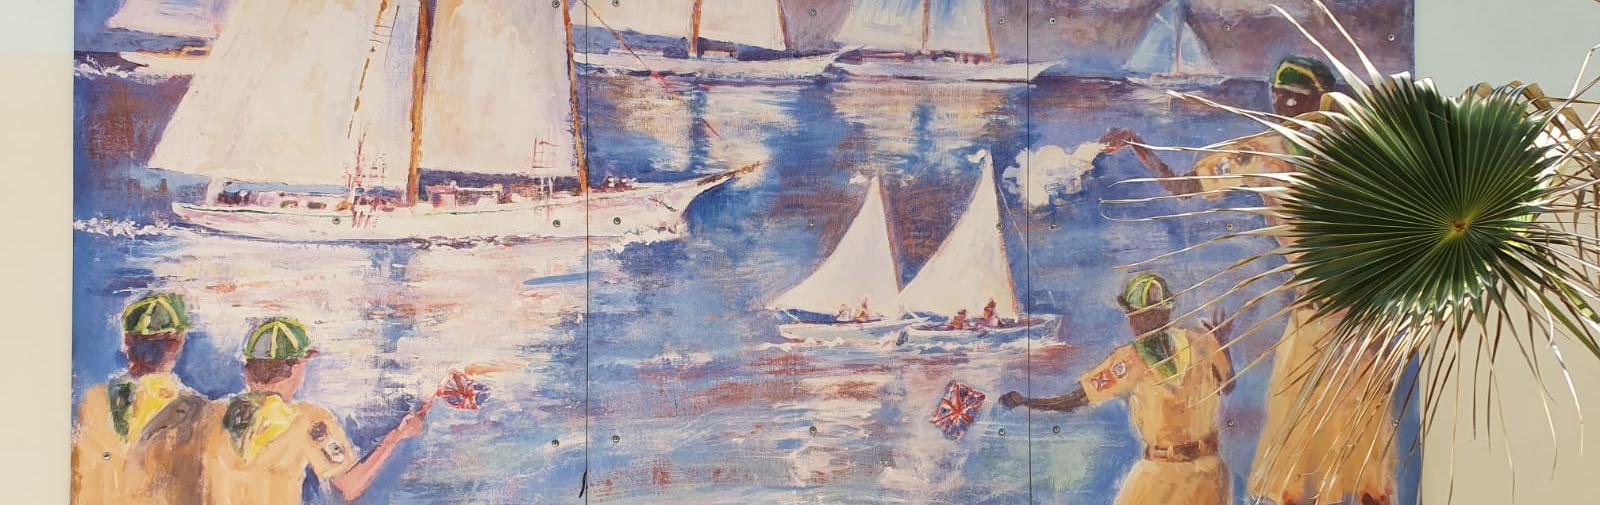 Painting with sailboats.